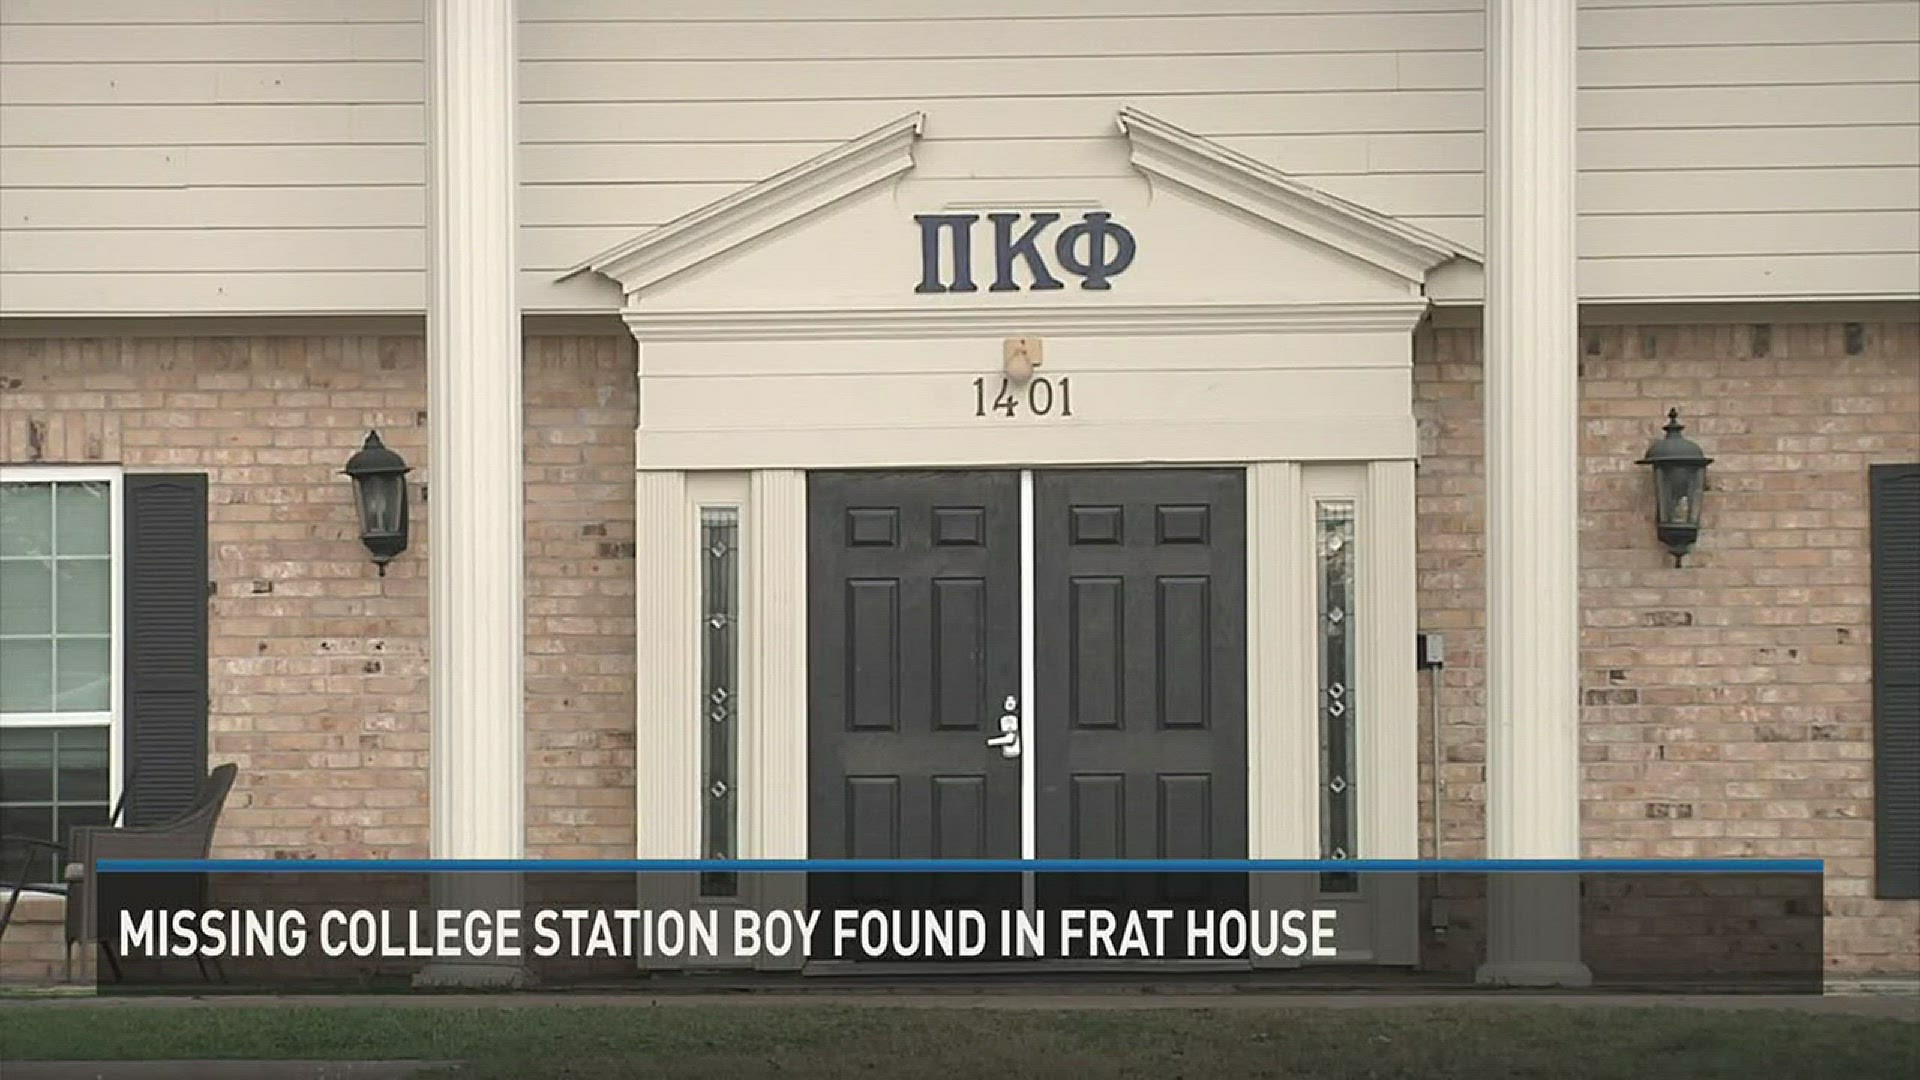 A seven-year-old boy with autism wandered from his home and into a fraternity house. Fraternity members helped him.